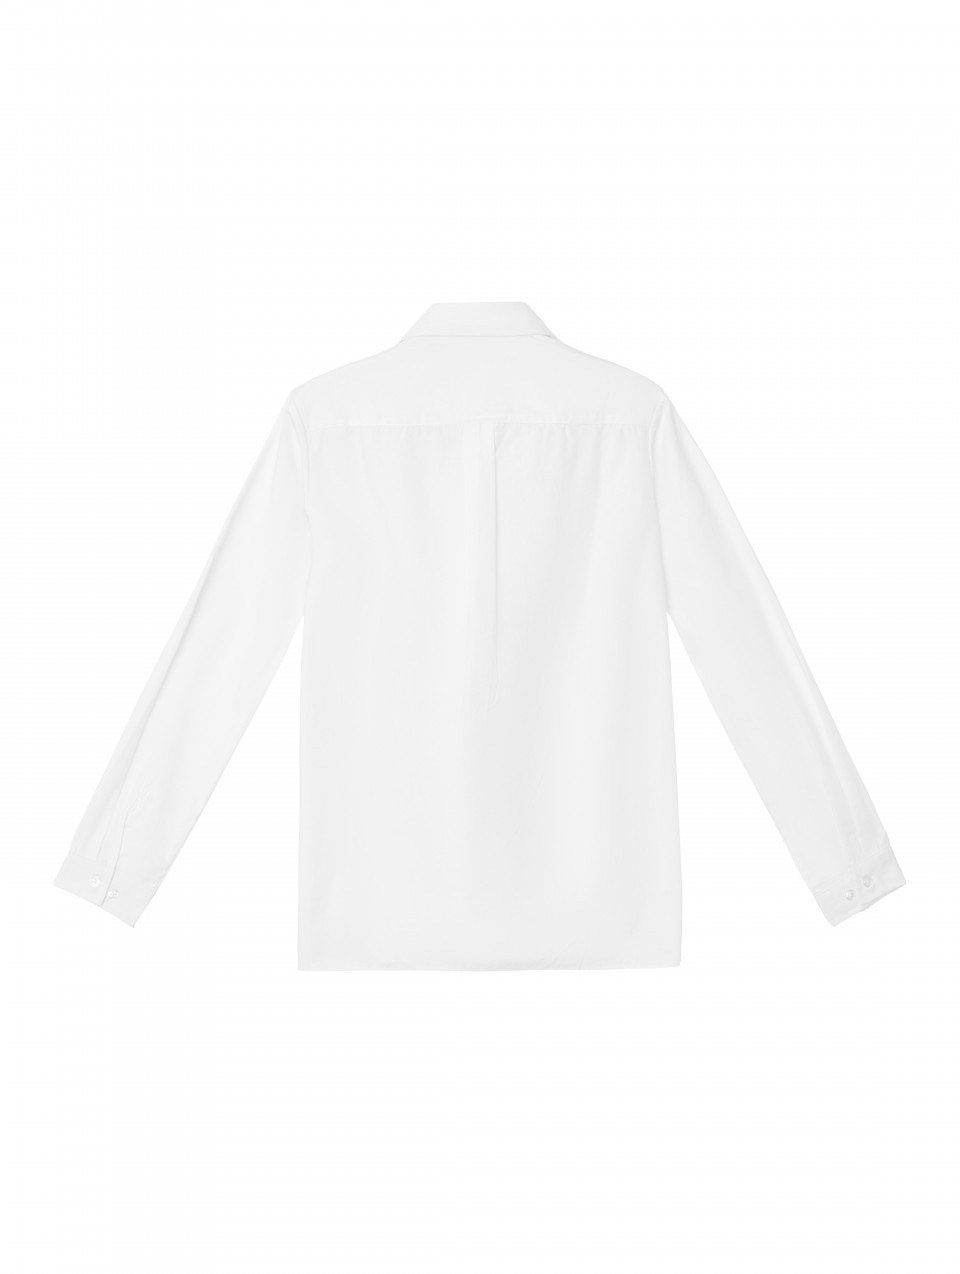 Women’s Premier Long Sleeve Blouse with Modesty Panel